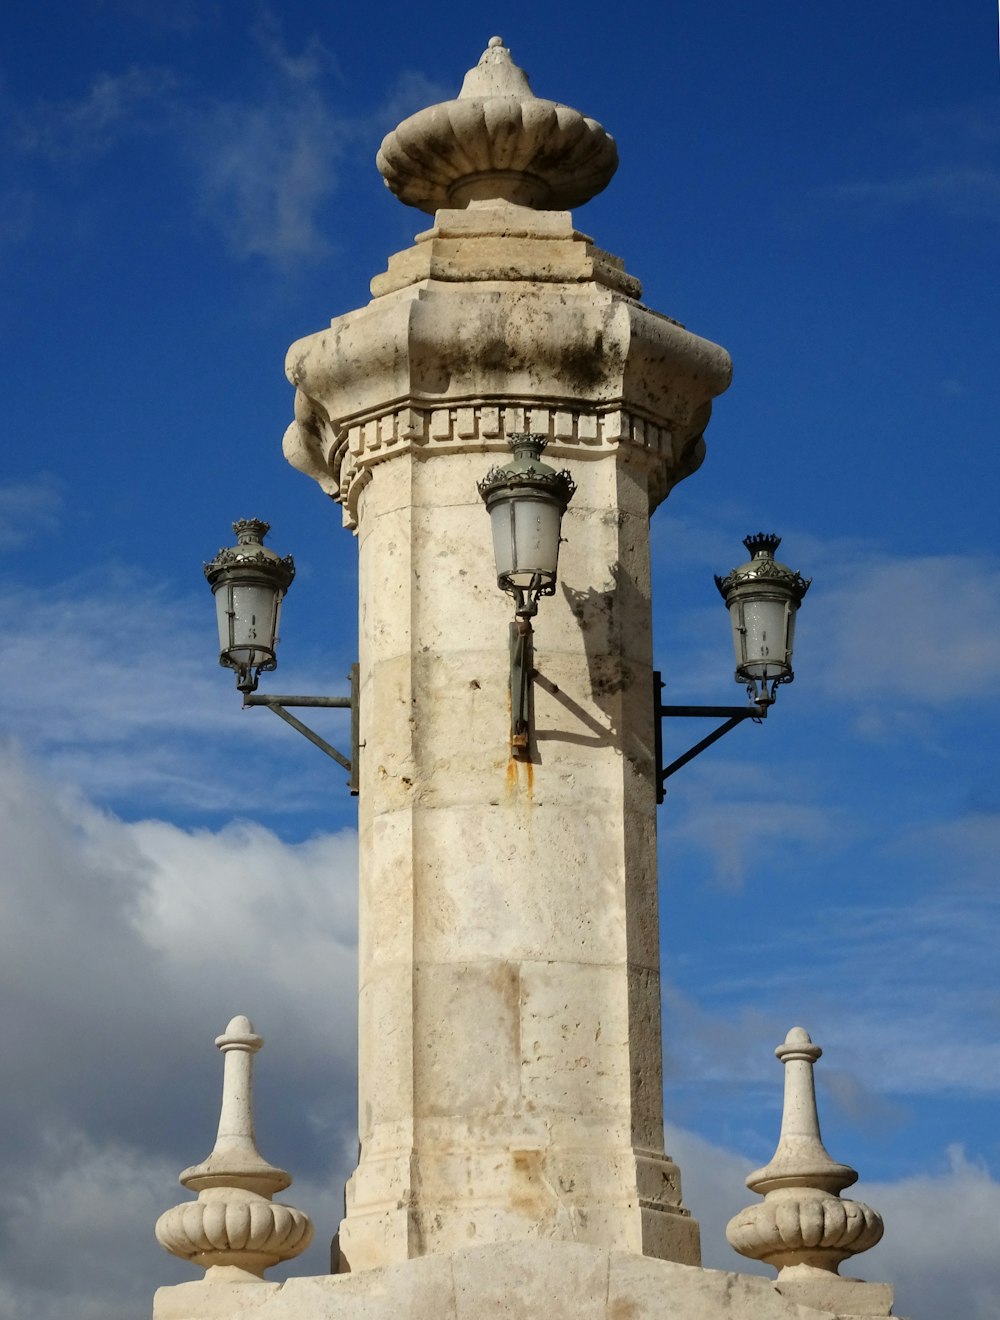 a light pole with two lamps on top of it